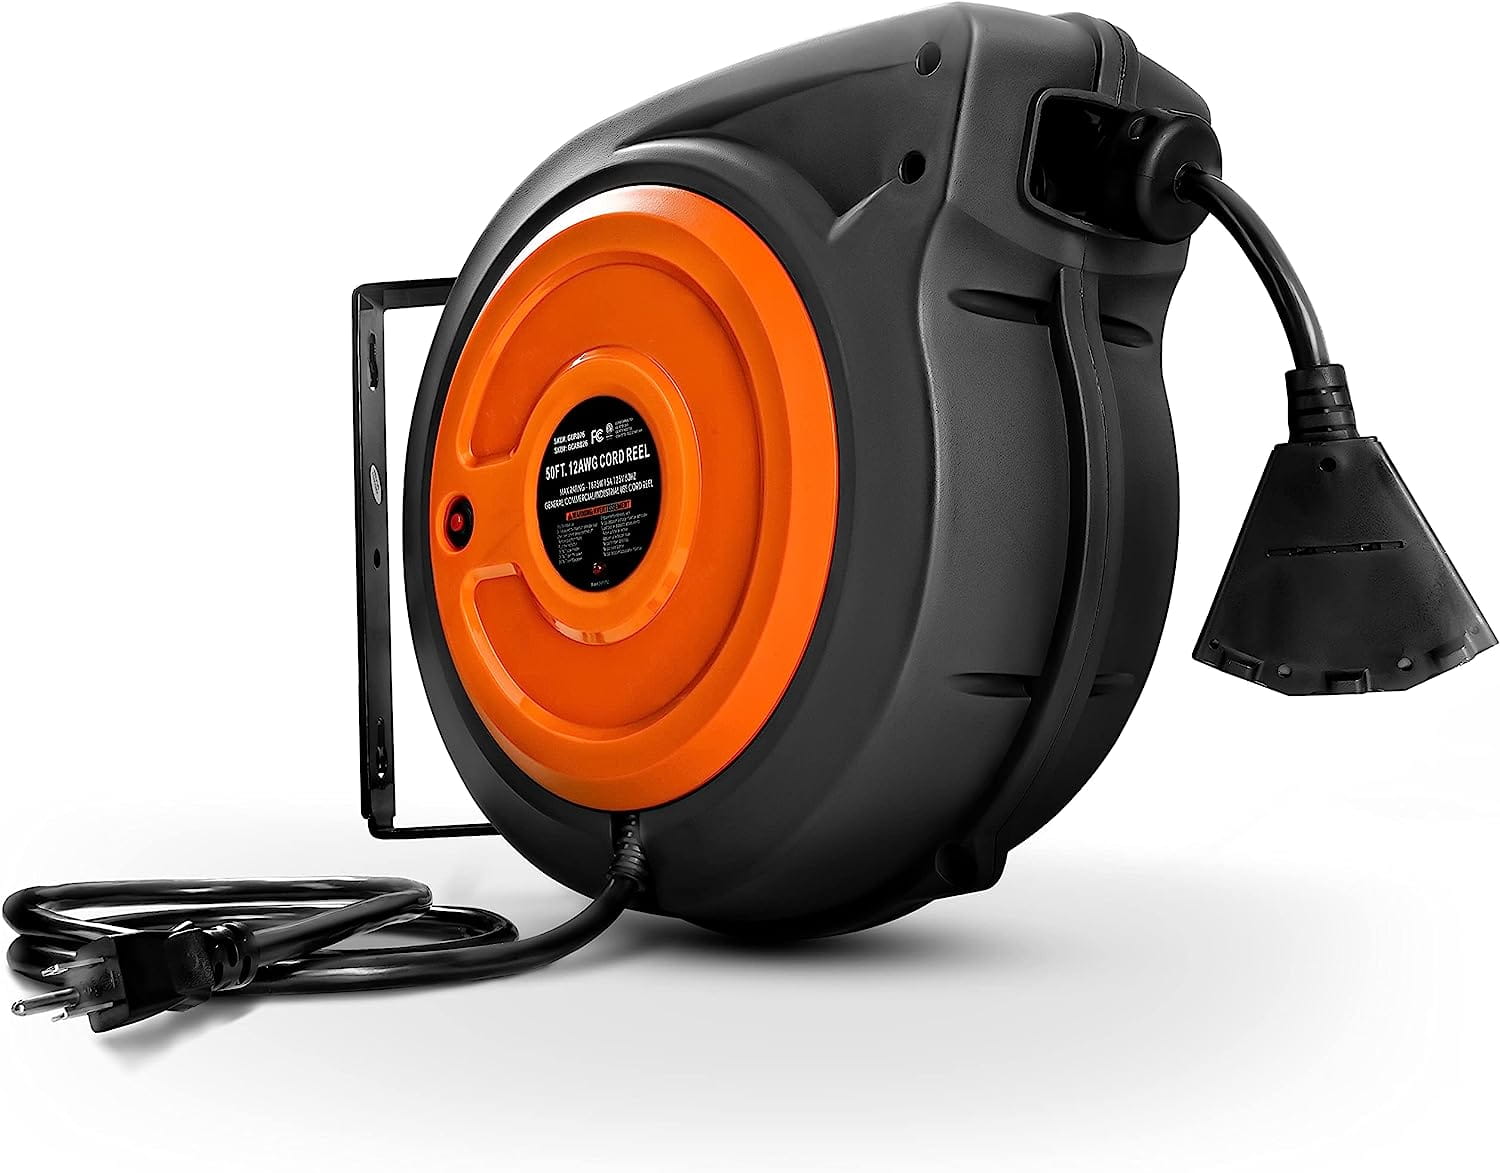 SuperHandy Retractable Extension Cord Reel - 12AWG x 50FT (Upgraded Design)